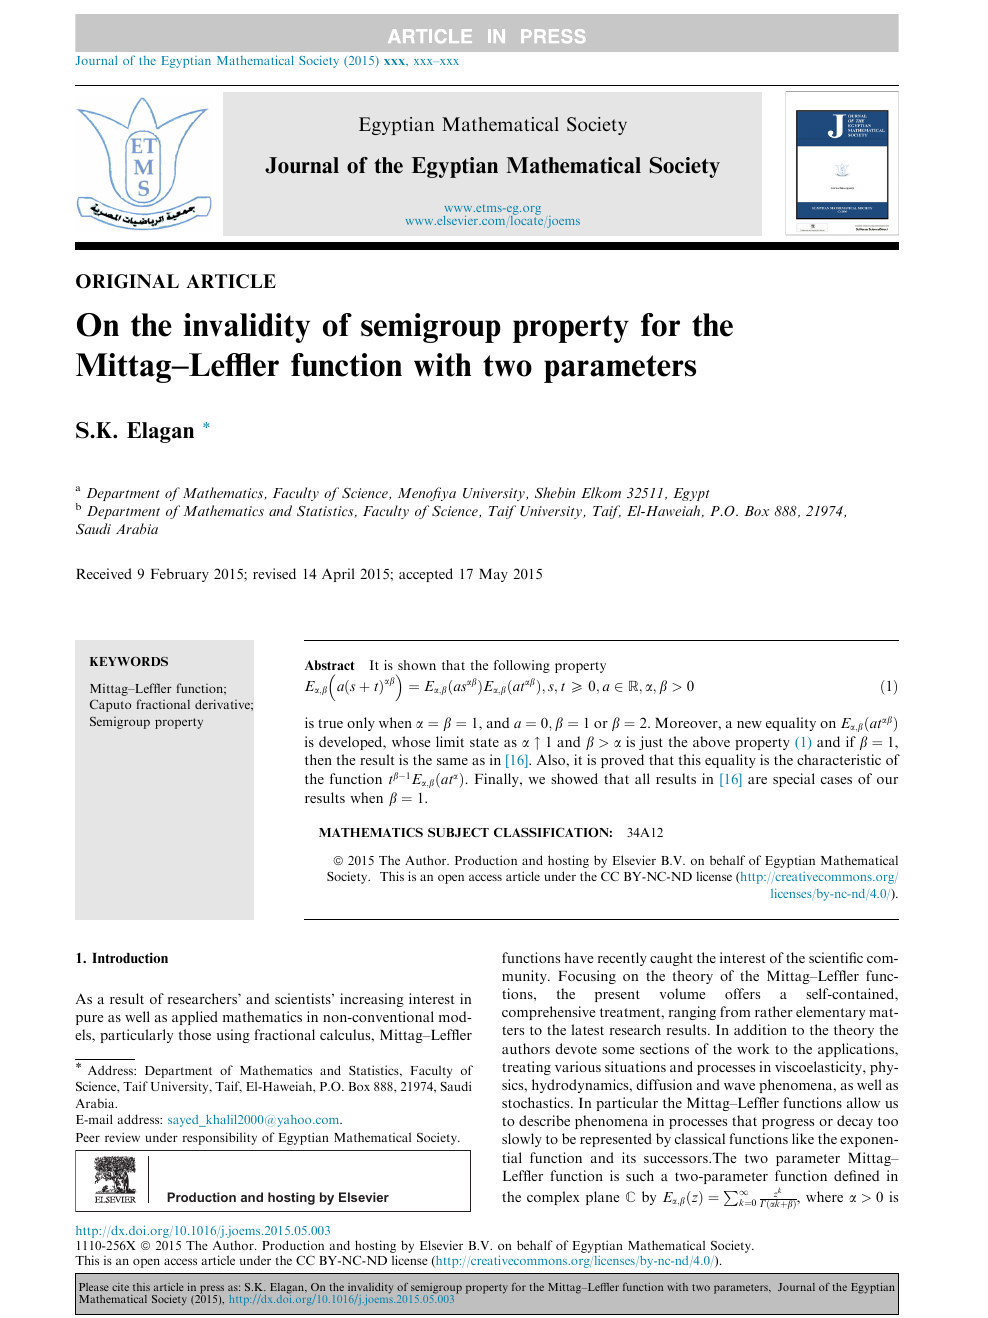 On The Invalidity Of Semigroup Property For The Mittag Leffler Function With Two Parameters Topic Of Research Paper In Mathematics Download Scholarly Article Pdf And Read For Free On Cyberleninka Open Science